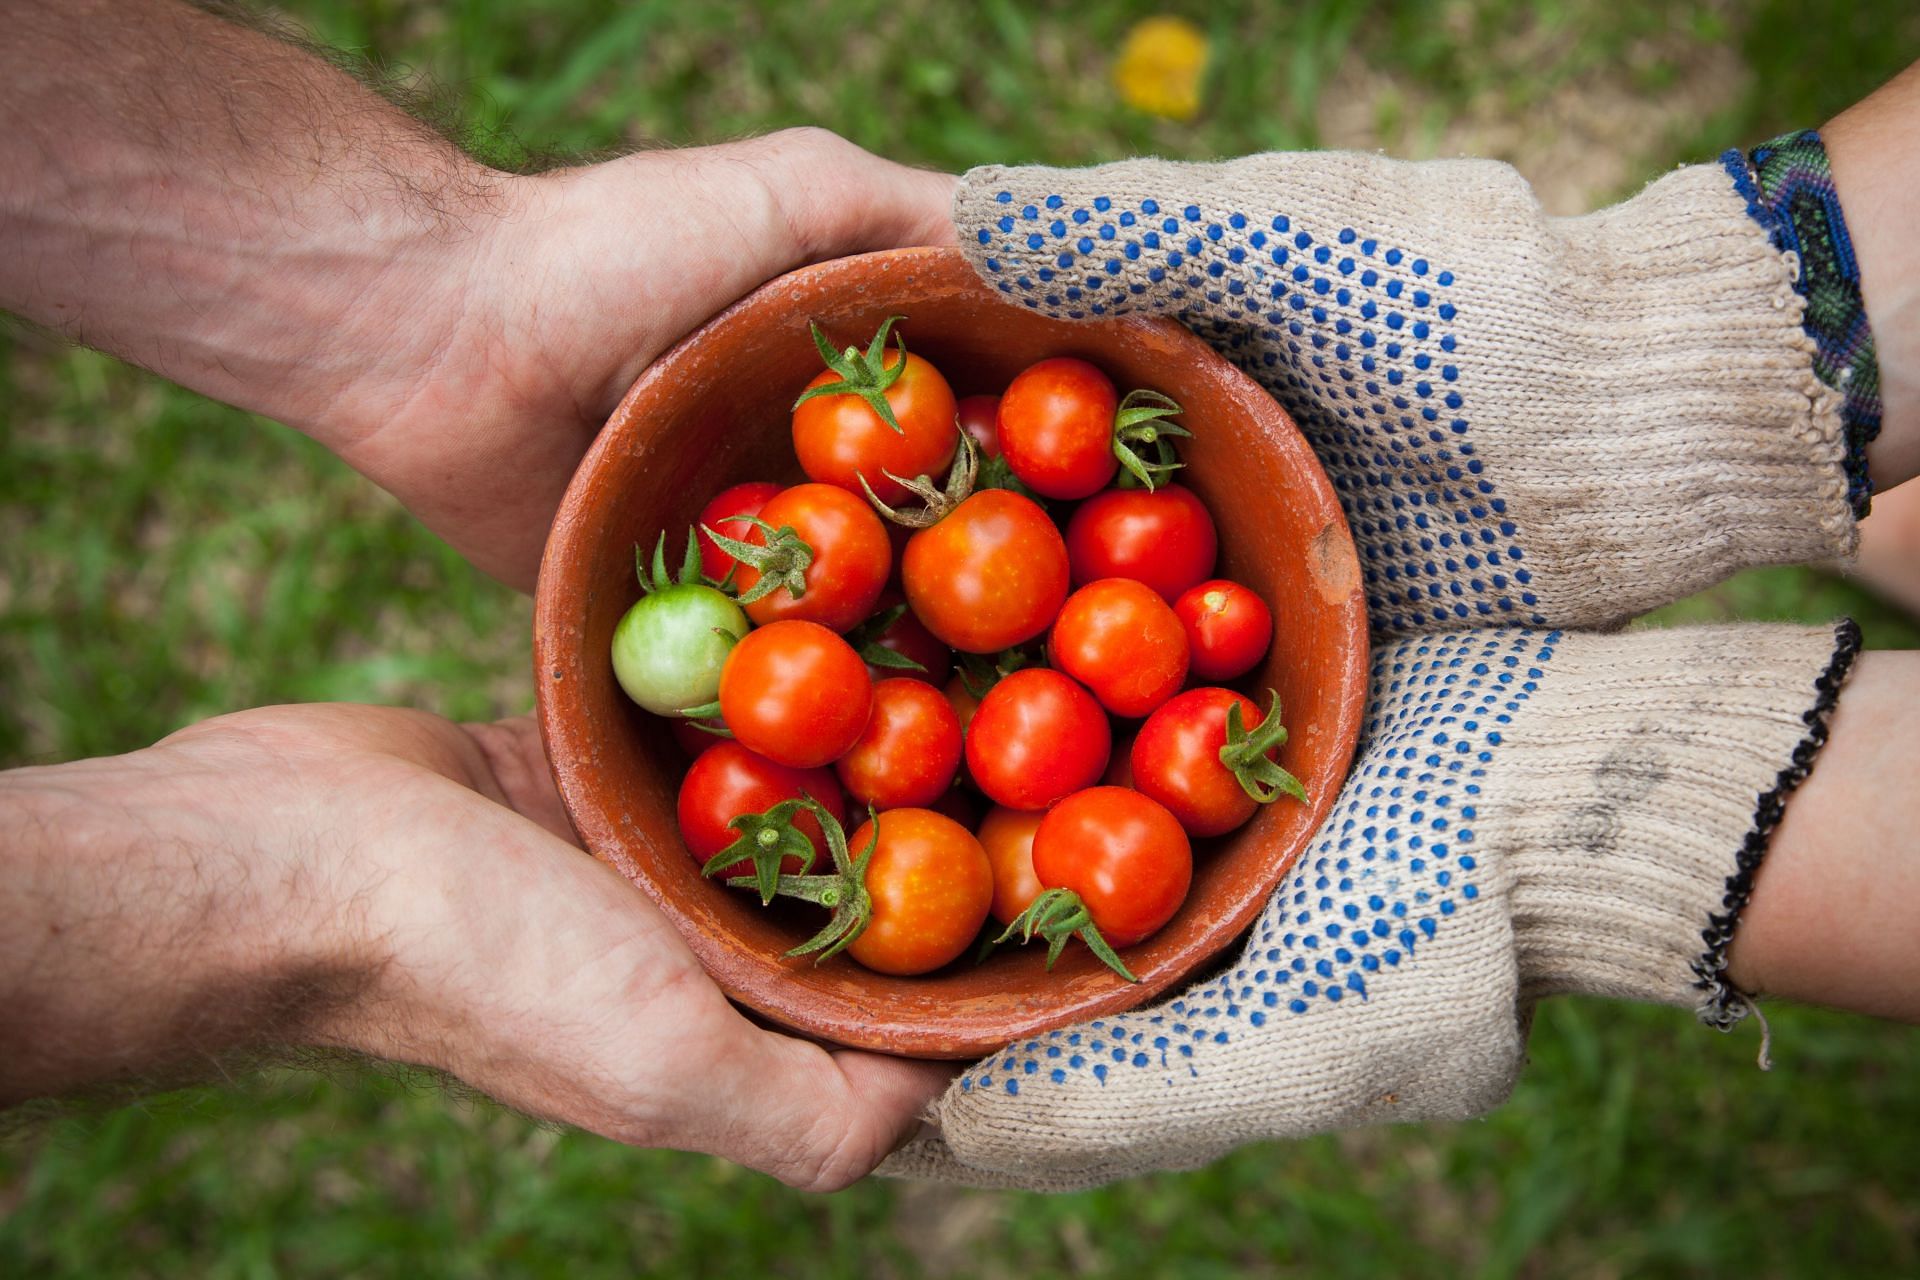 Tomatoes are also good for glowing skin. (Image via Unsplash/Elaine Casap)